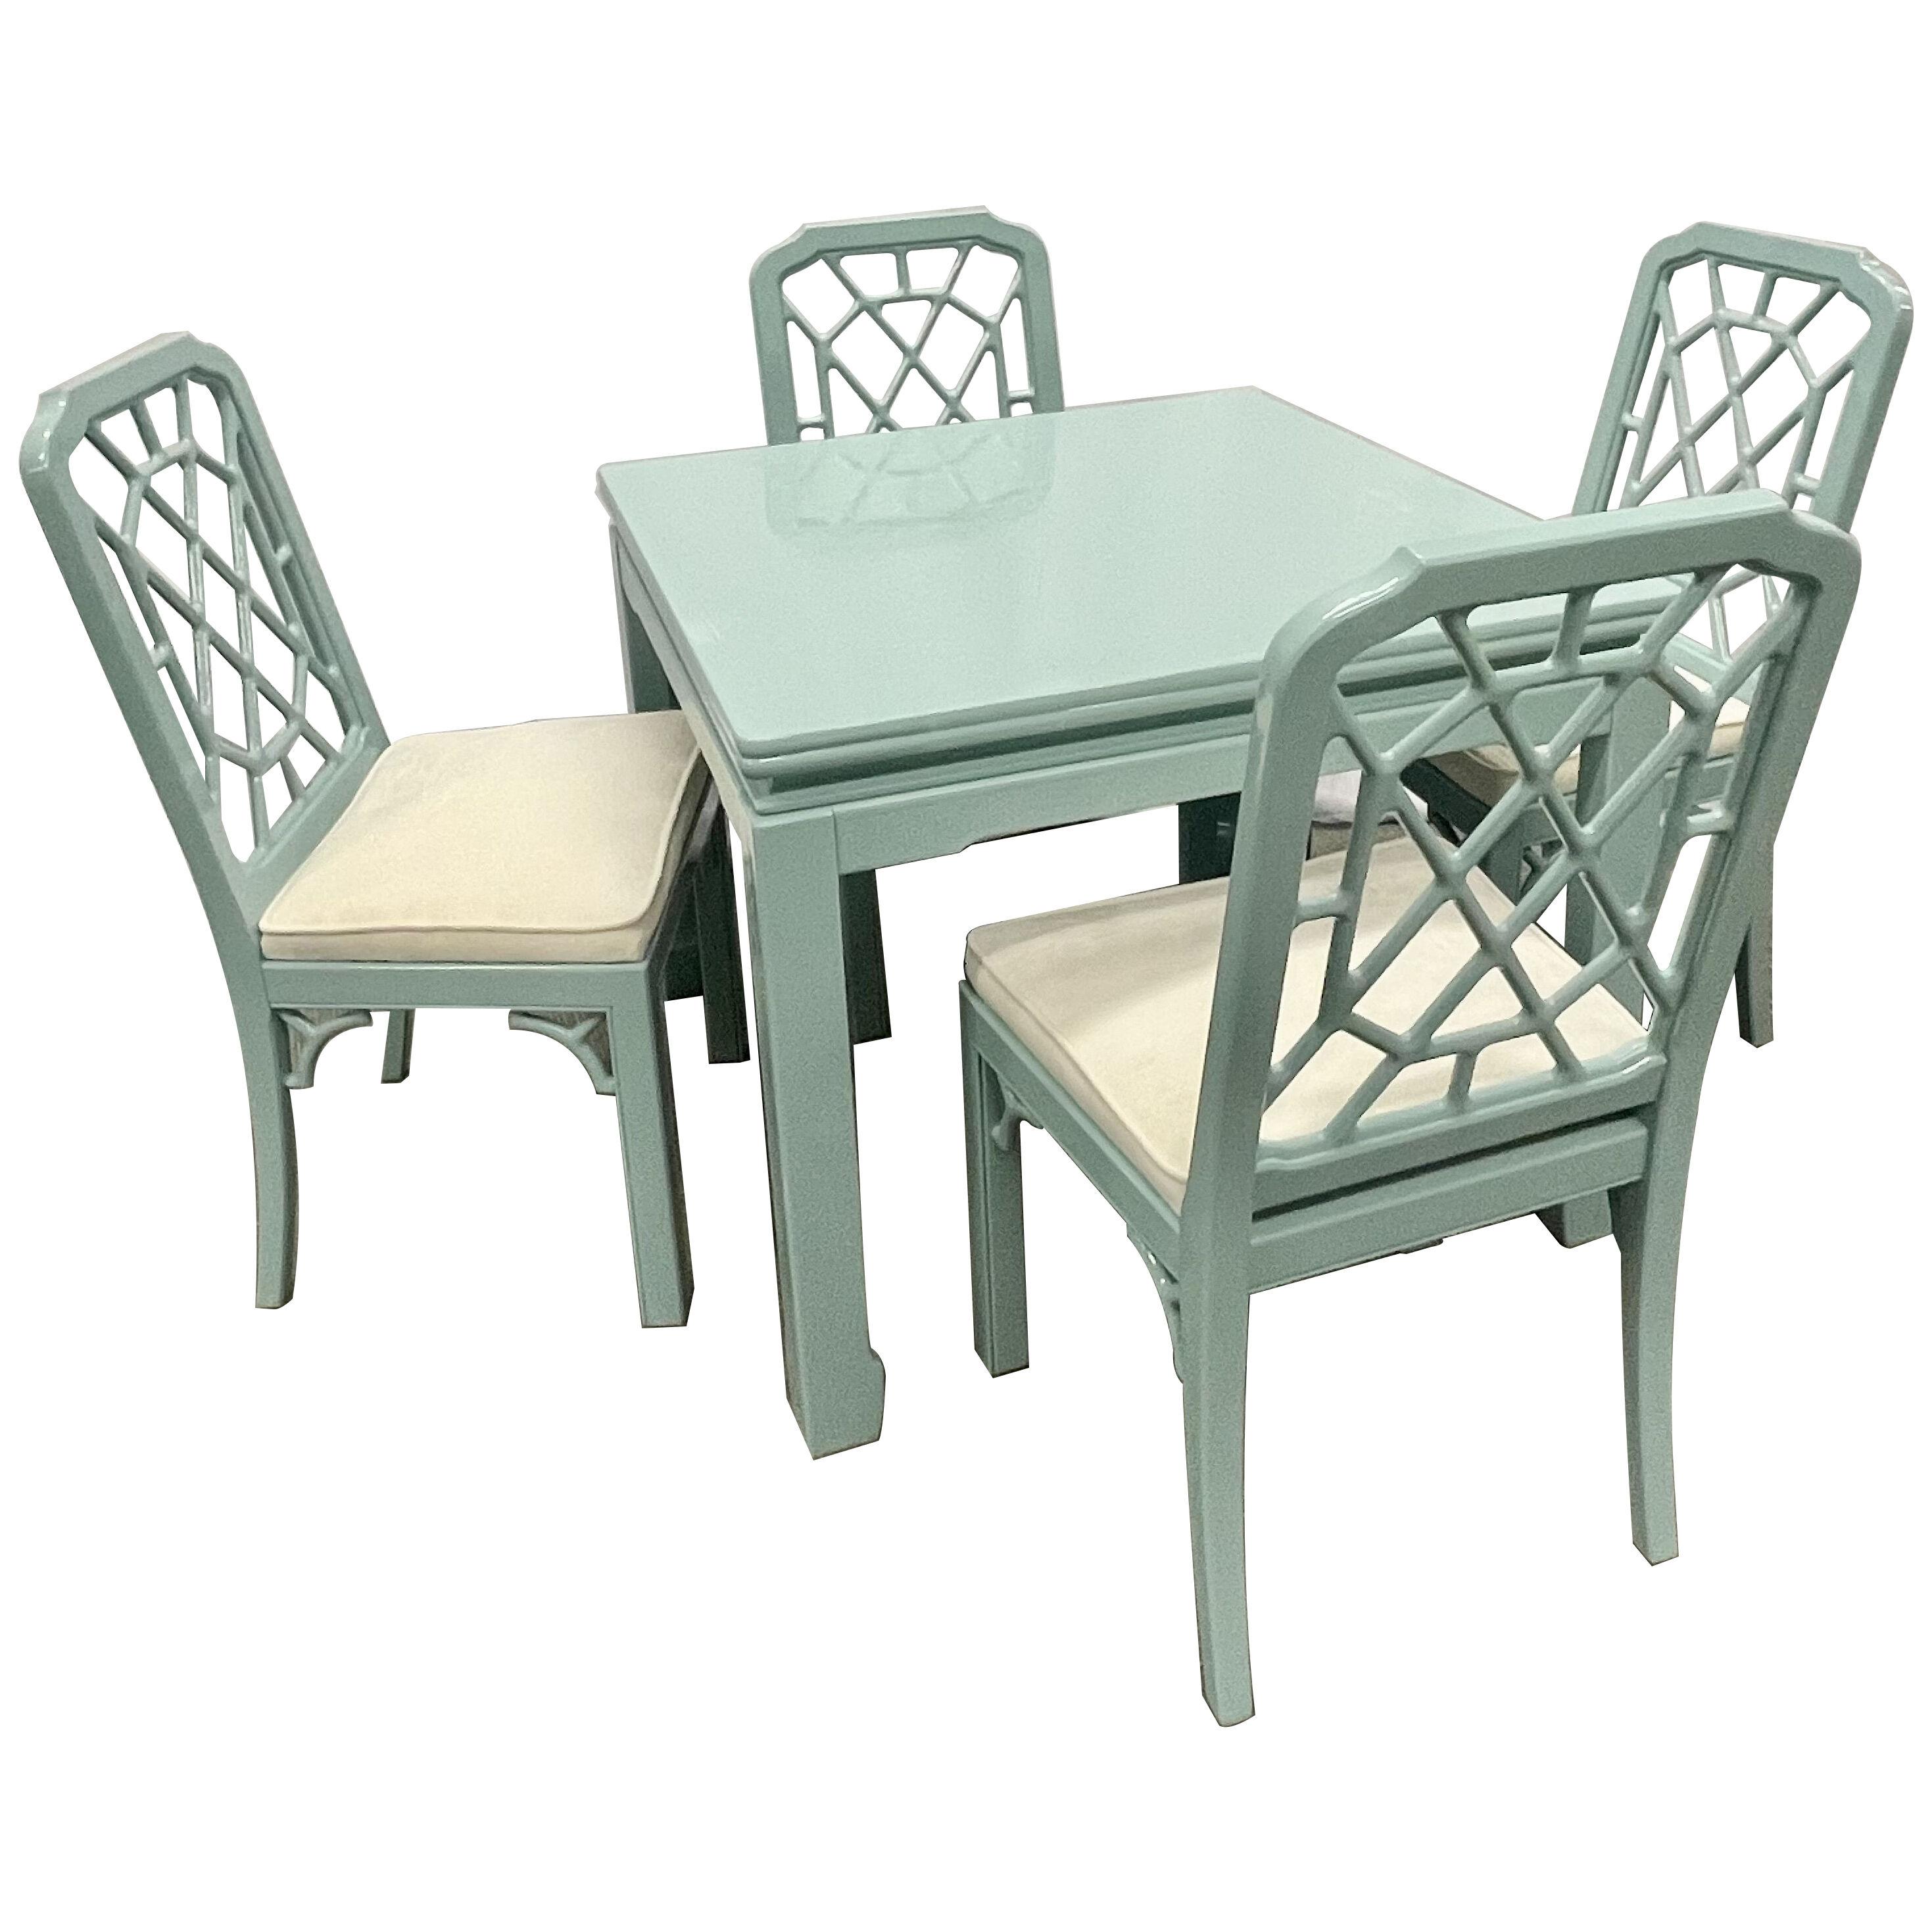 John Widdicomb Game, Dining, Card Table and Chairs Set, Mid Century Modern,